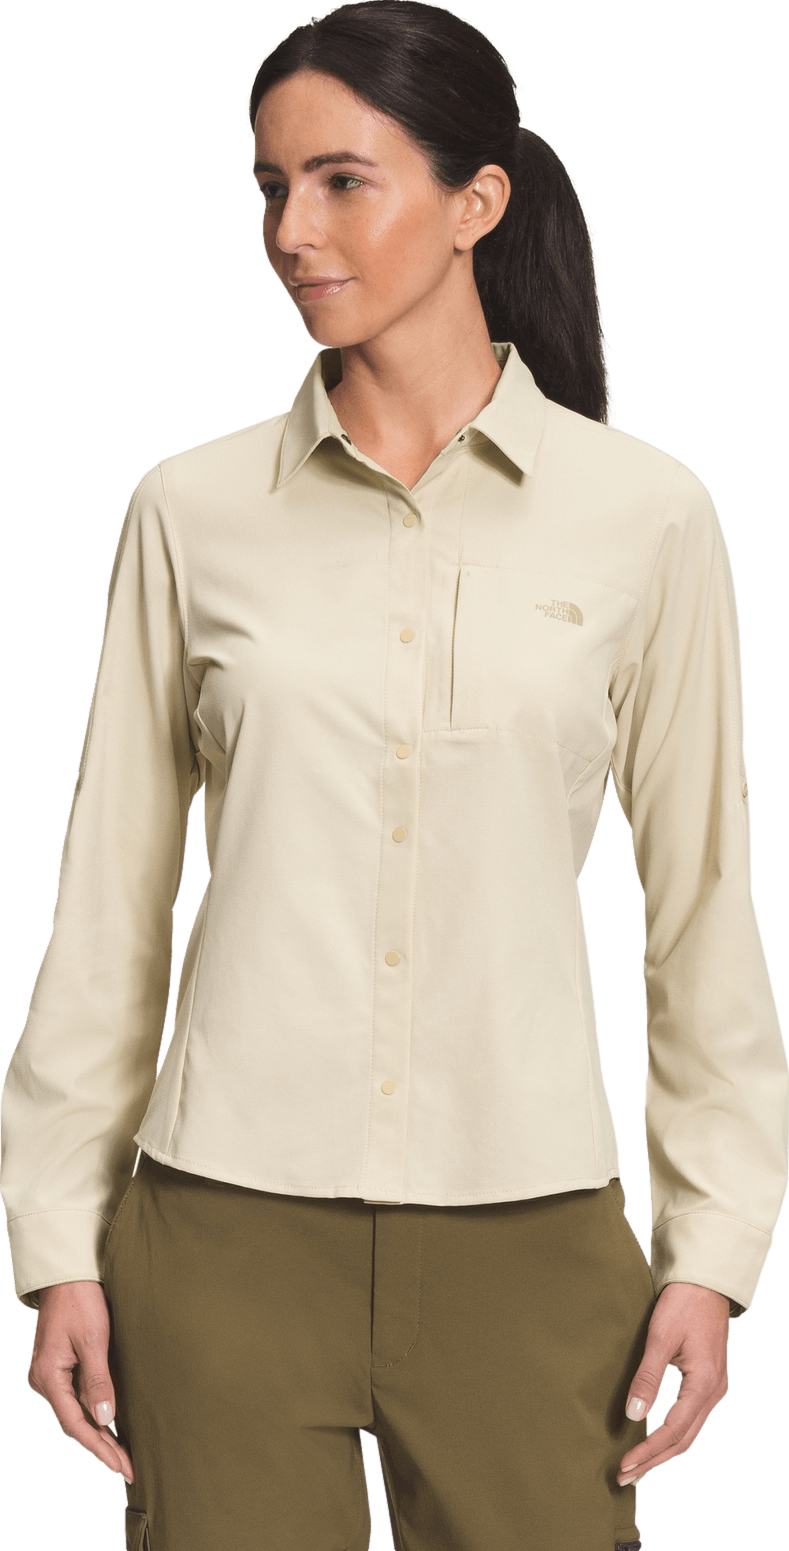 The North Face Women's First Trail UPF Long Sleeve Shirt